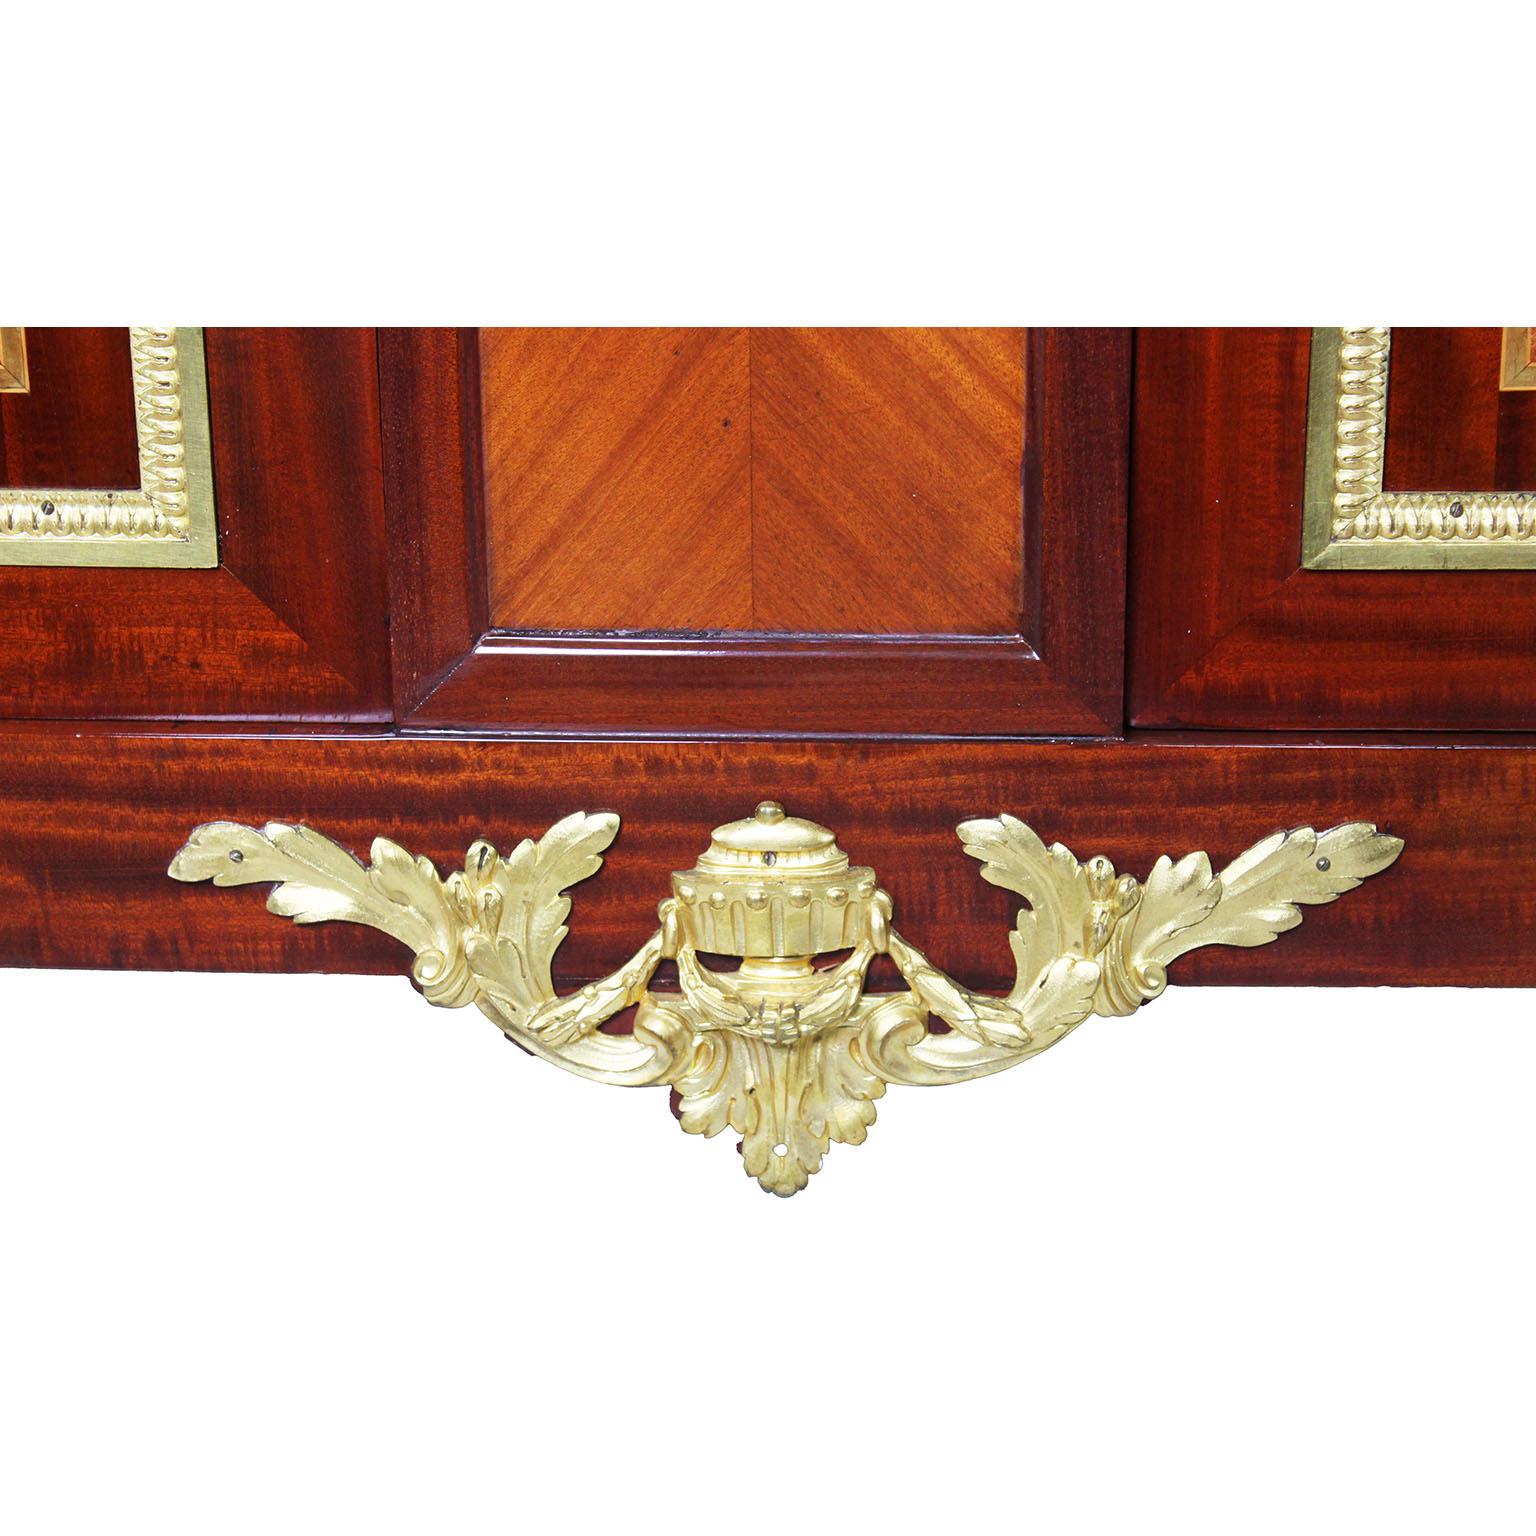 French 19th-20th C. Louis XV Style Mahogany Ormolu Mounted Buffet Server Cabinet For Sale 7